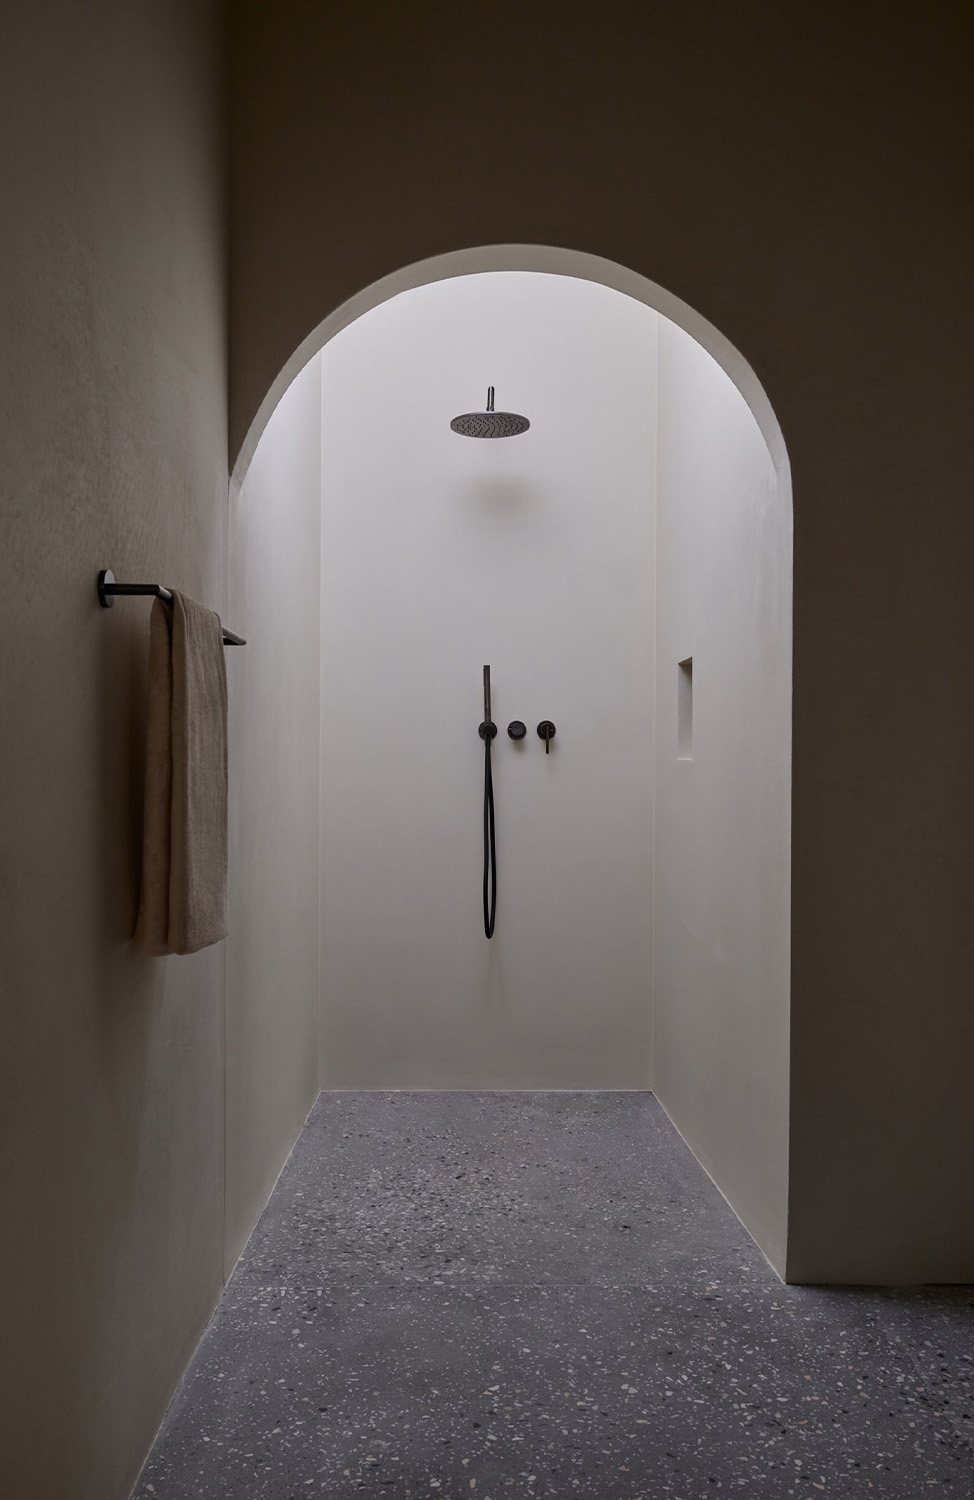 Shower with black fittings and plastered walls, terrazzo flooring.